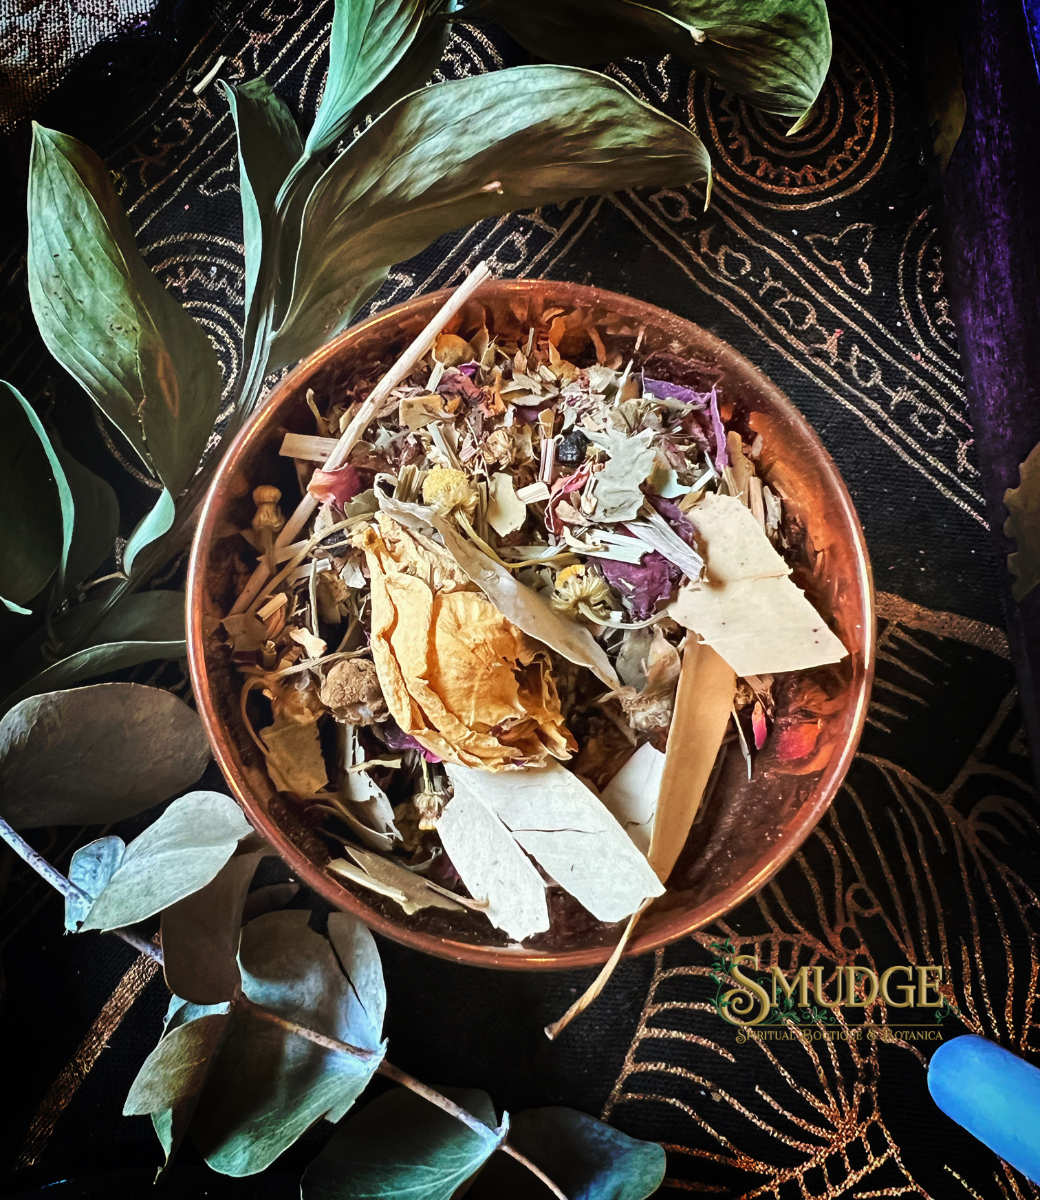 Witchcraft Kit, Bottles Herbs for Witchcraft, Hoodoo, Witchcraft Herbs,  Witch Herbs, Rituals, Wicca Herbs, Dried Herbs and Flowers for Spells,  Spell